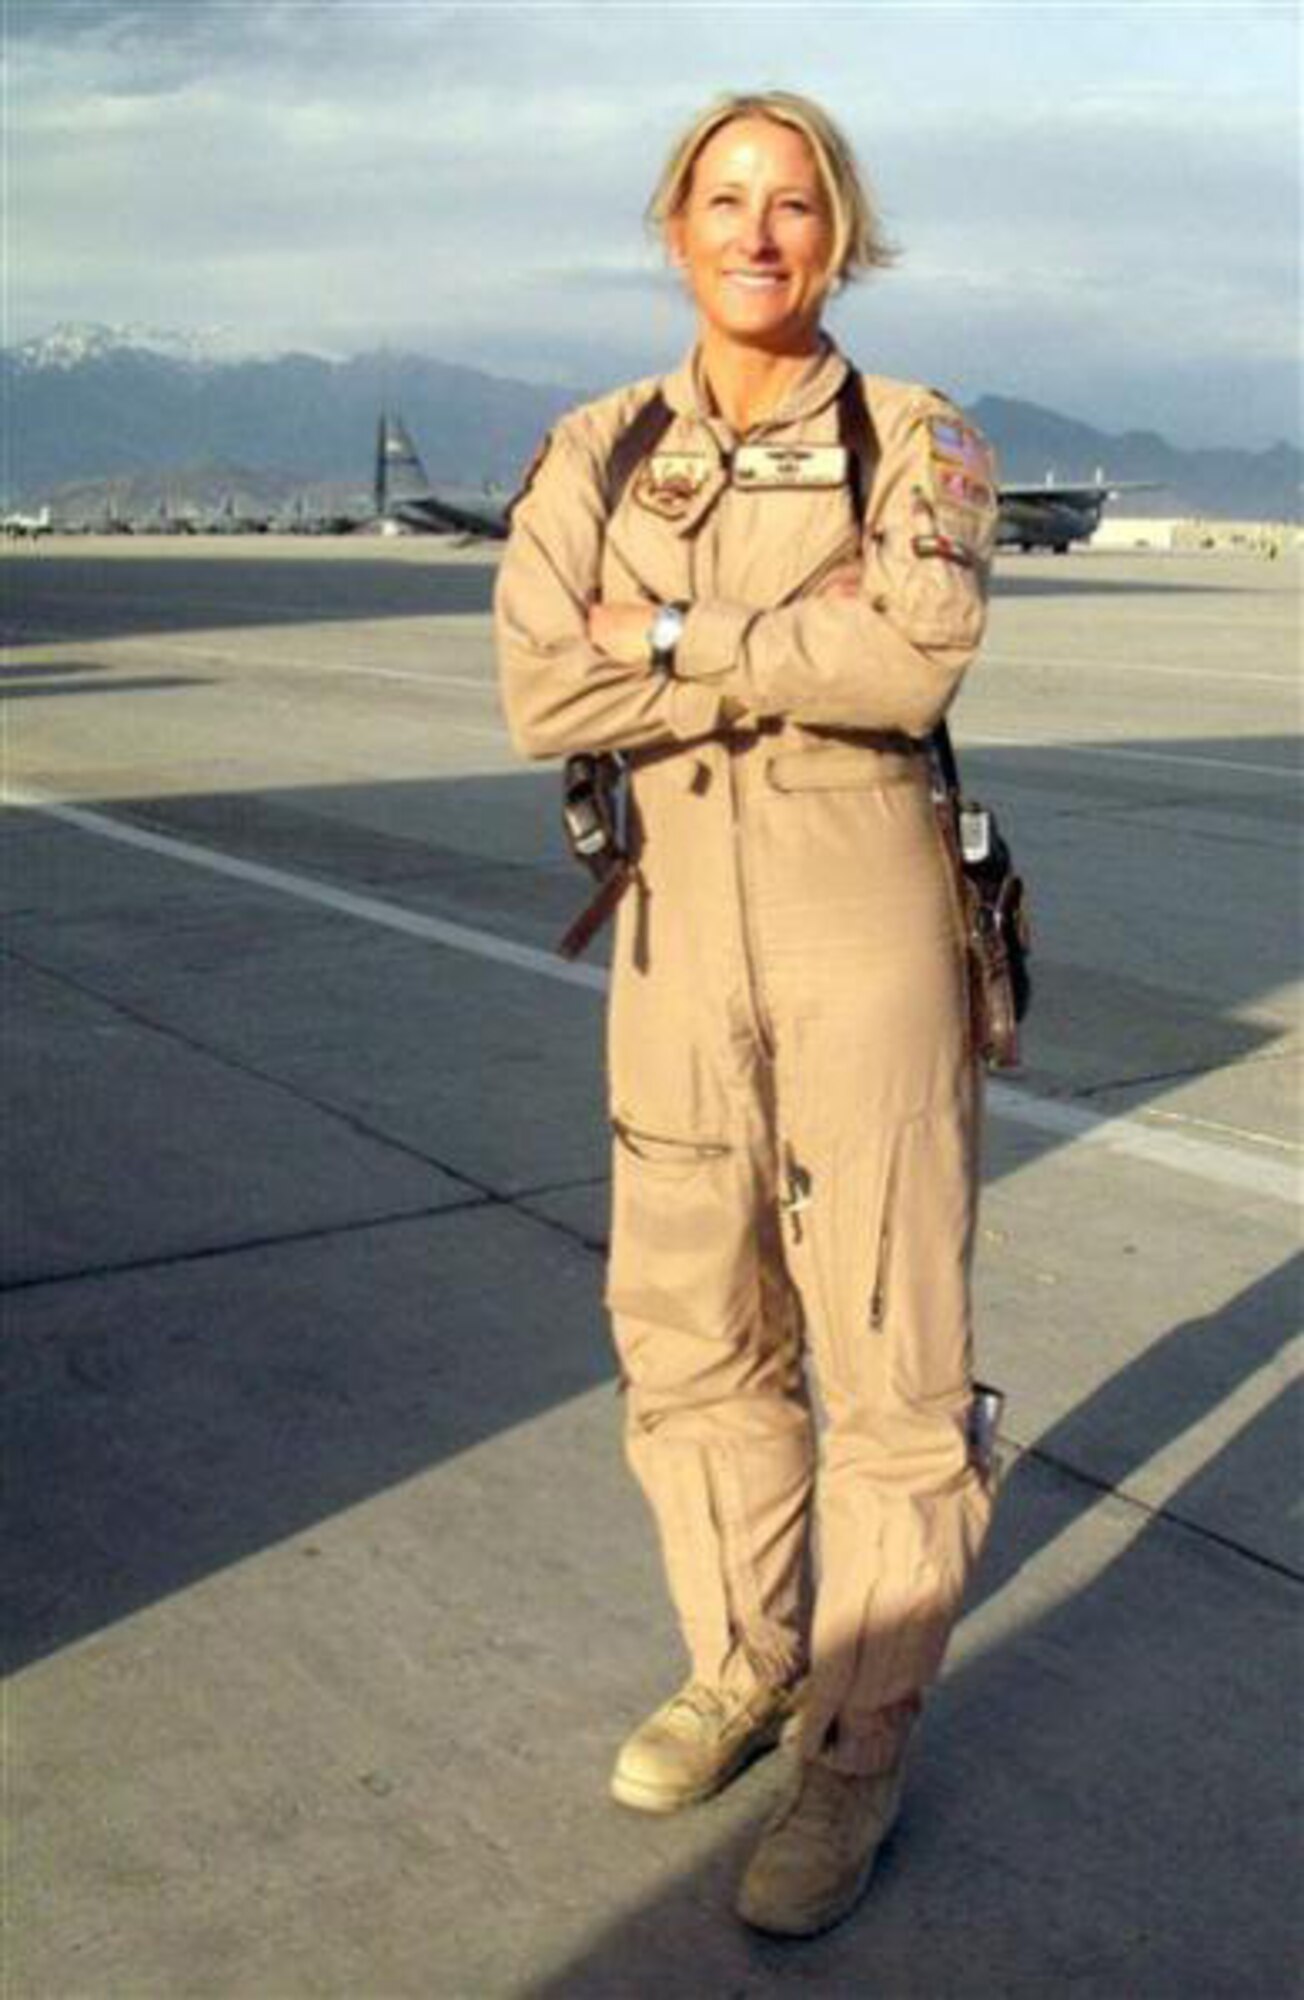 Col. Kathleen Flarity, 34th Aeromedical Evacuation Squadron commander, stands on the flightline of an undisclosed location in South Asia in May 2011.